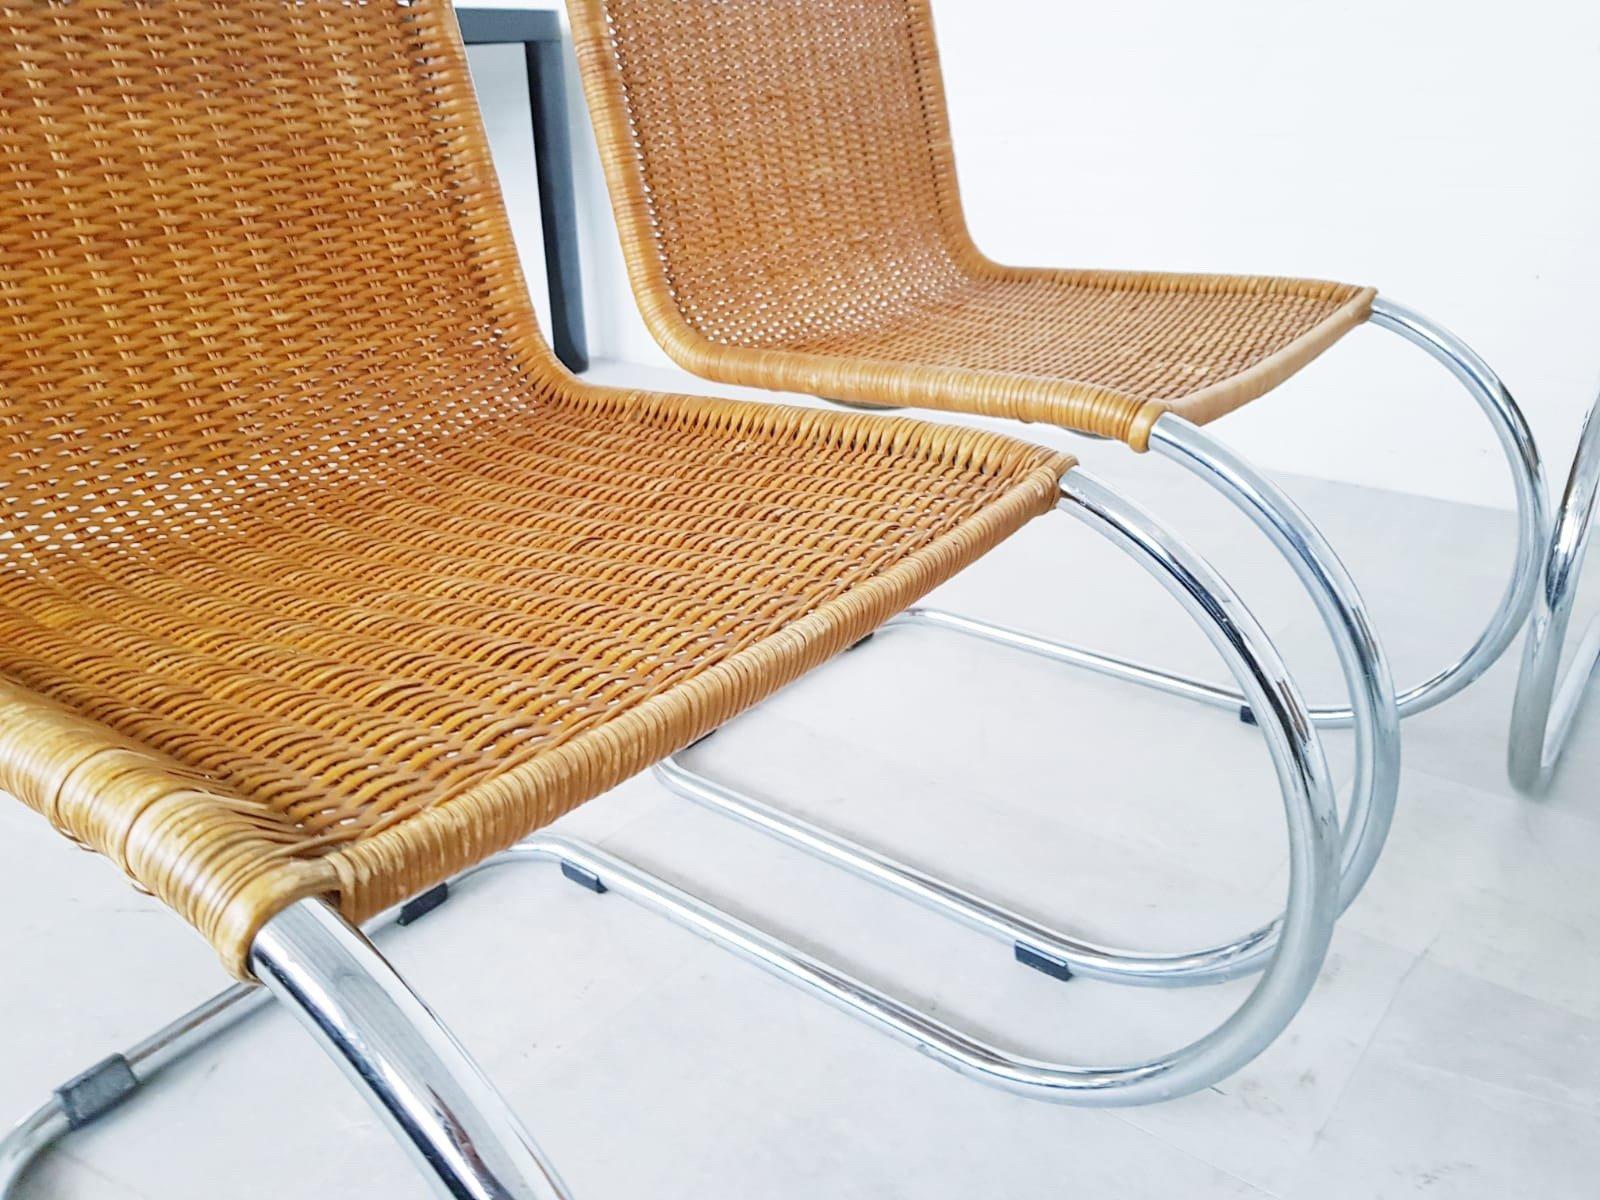 Rattan Mies van der Rohe Cantilever Chairs for Thonet